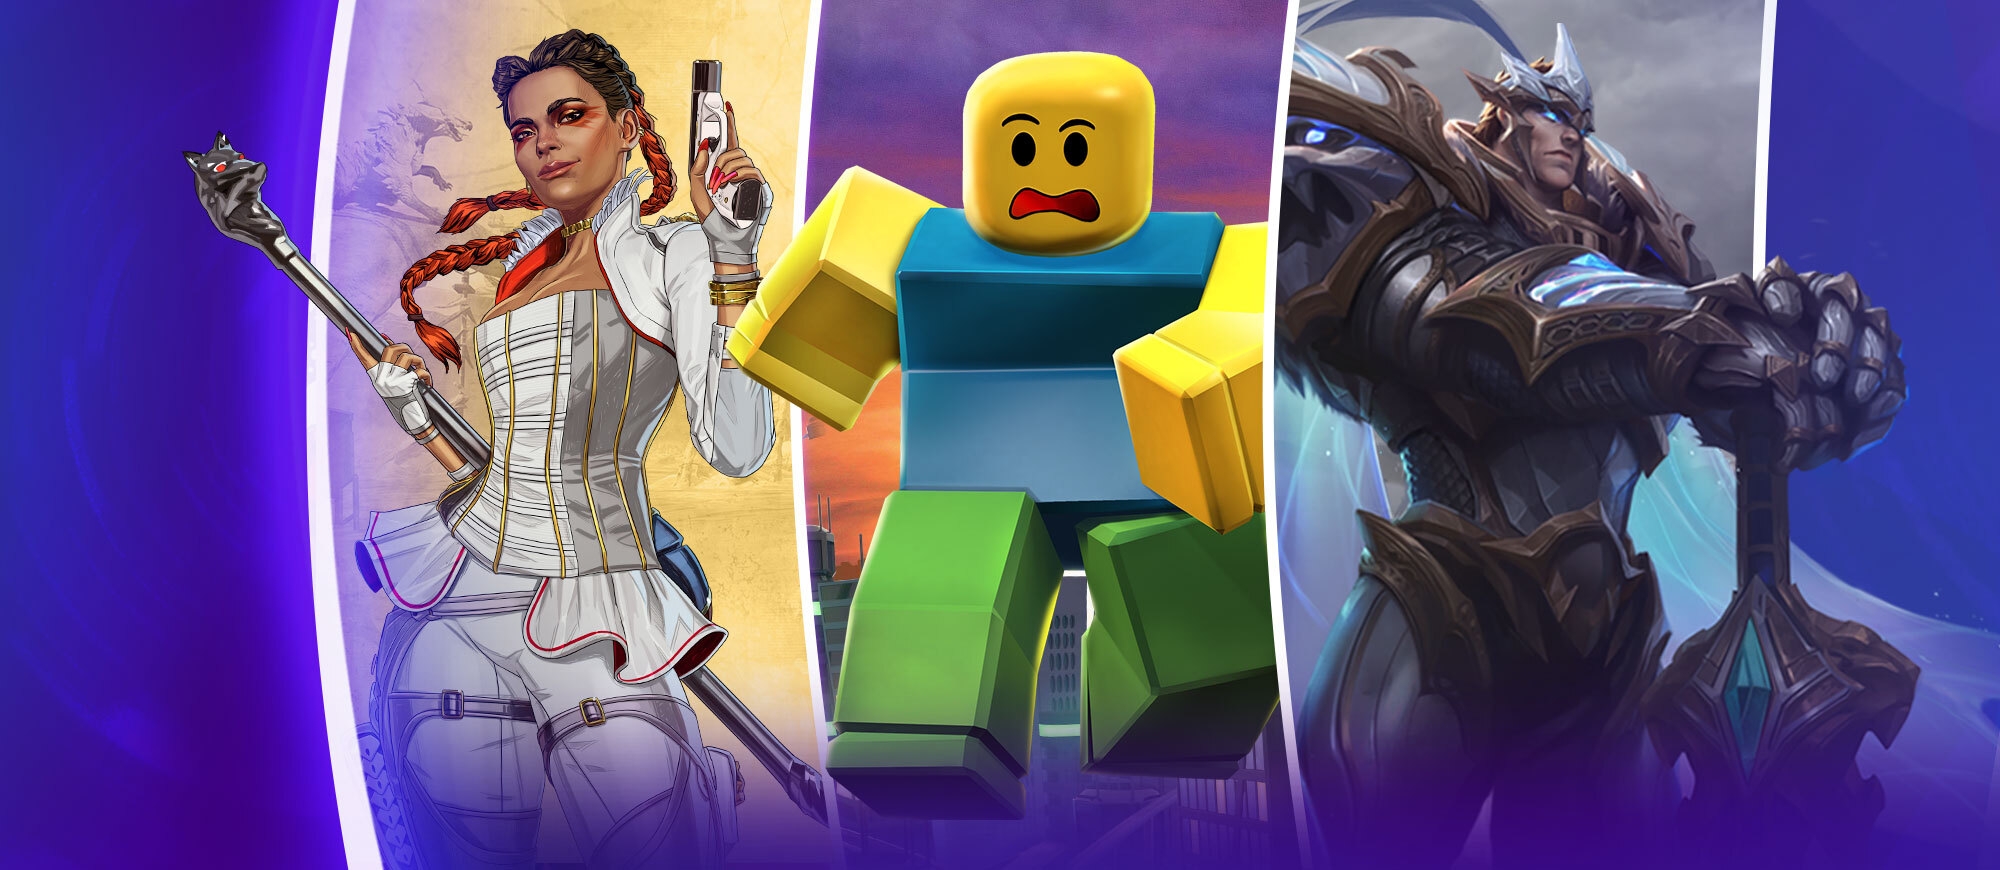 Three graphic characters from video games: a woman with red braids, a white outfit, and a gun; a blocky yellow character running; and a man with laser eyes in a medieval costume. 